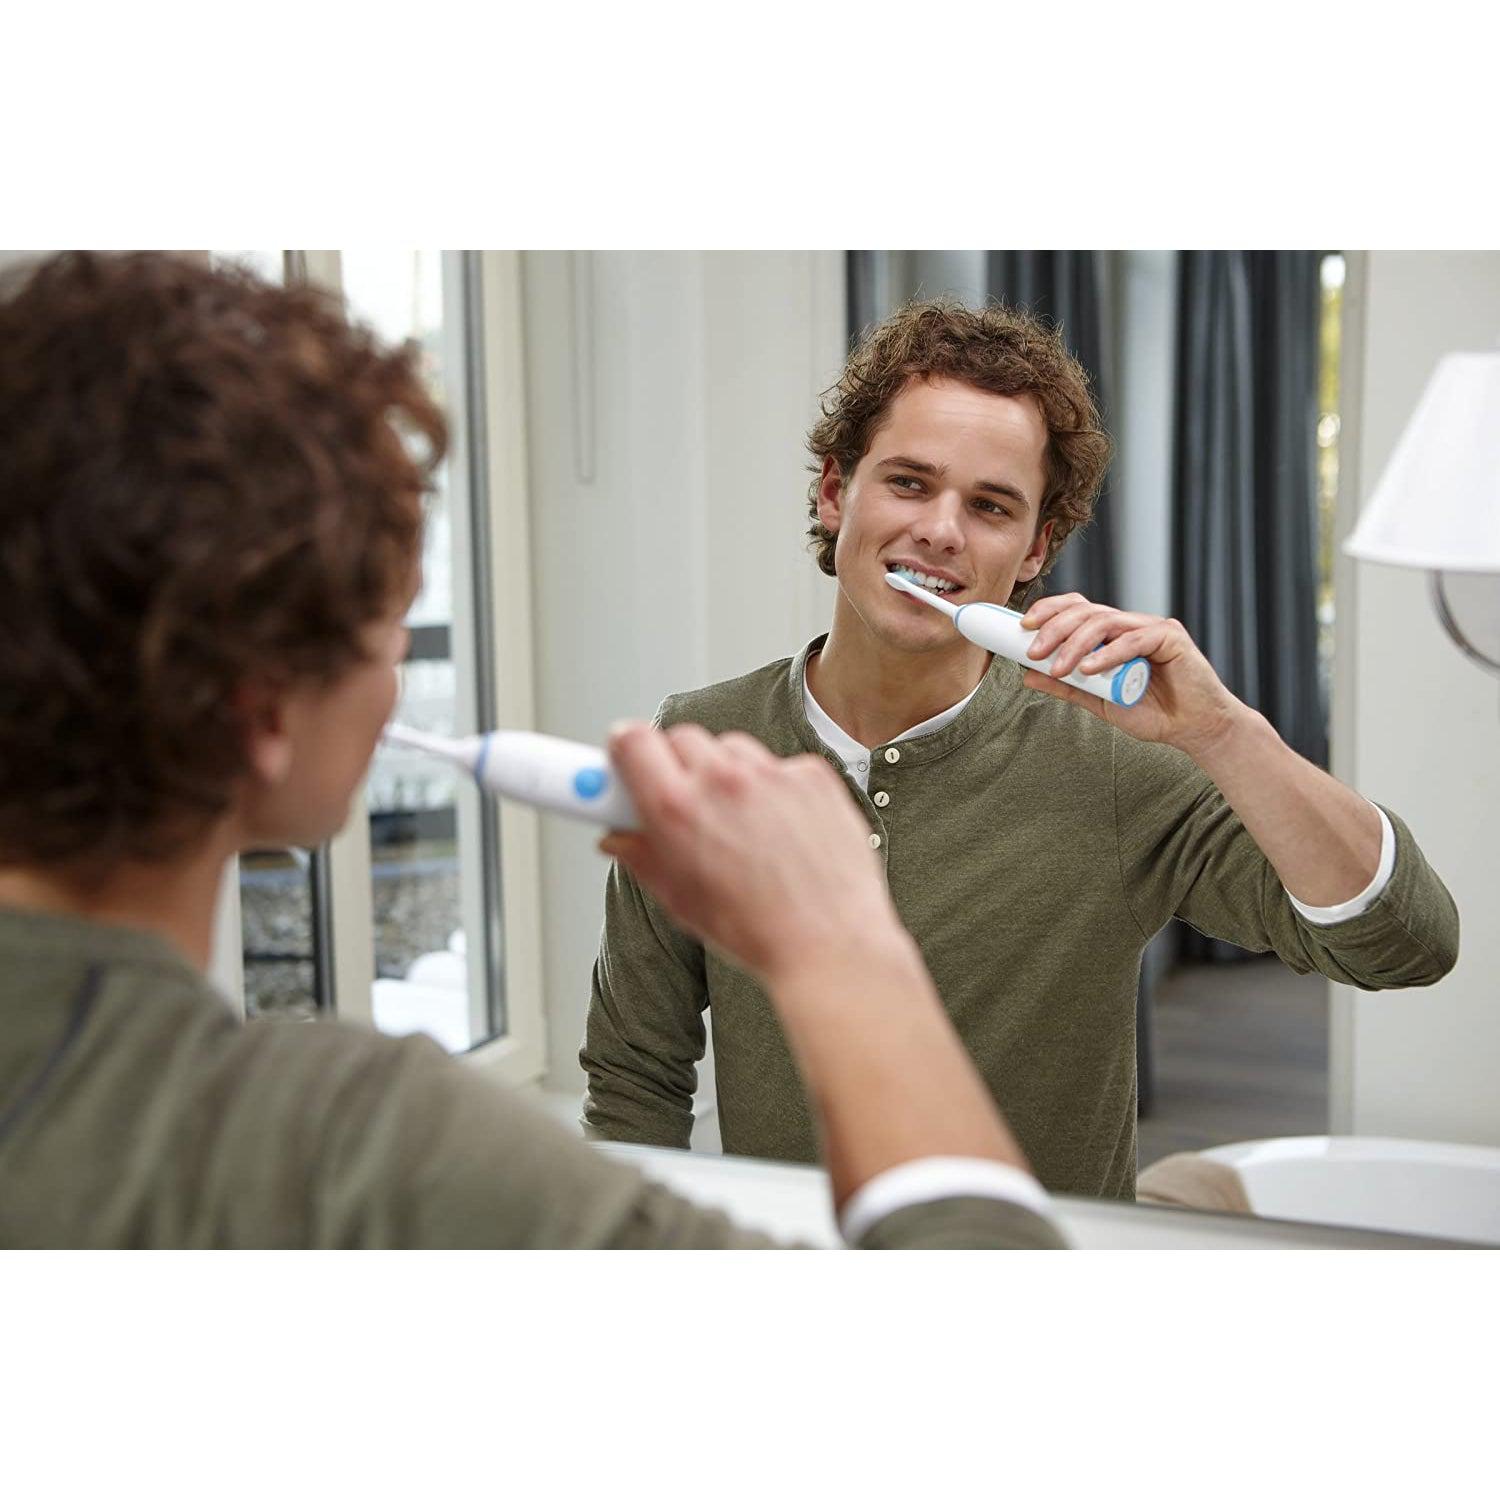 Philips Sonicare Clean Care HX3212/11 – Electric Toothbrush, Anti Plaque Defence White and Blue - Healthxpress.ie